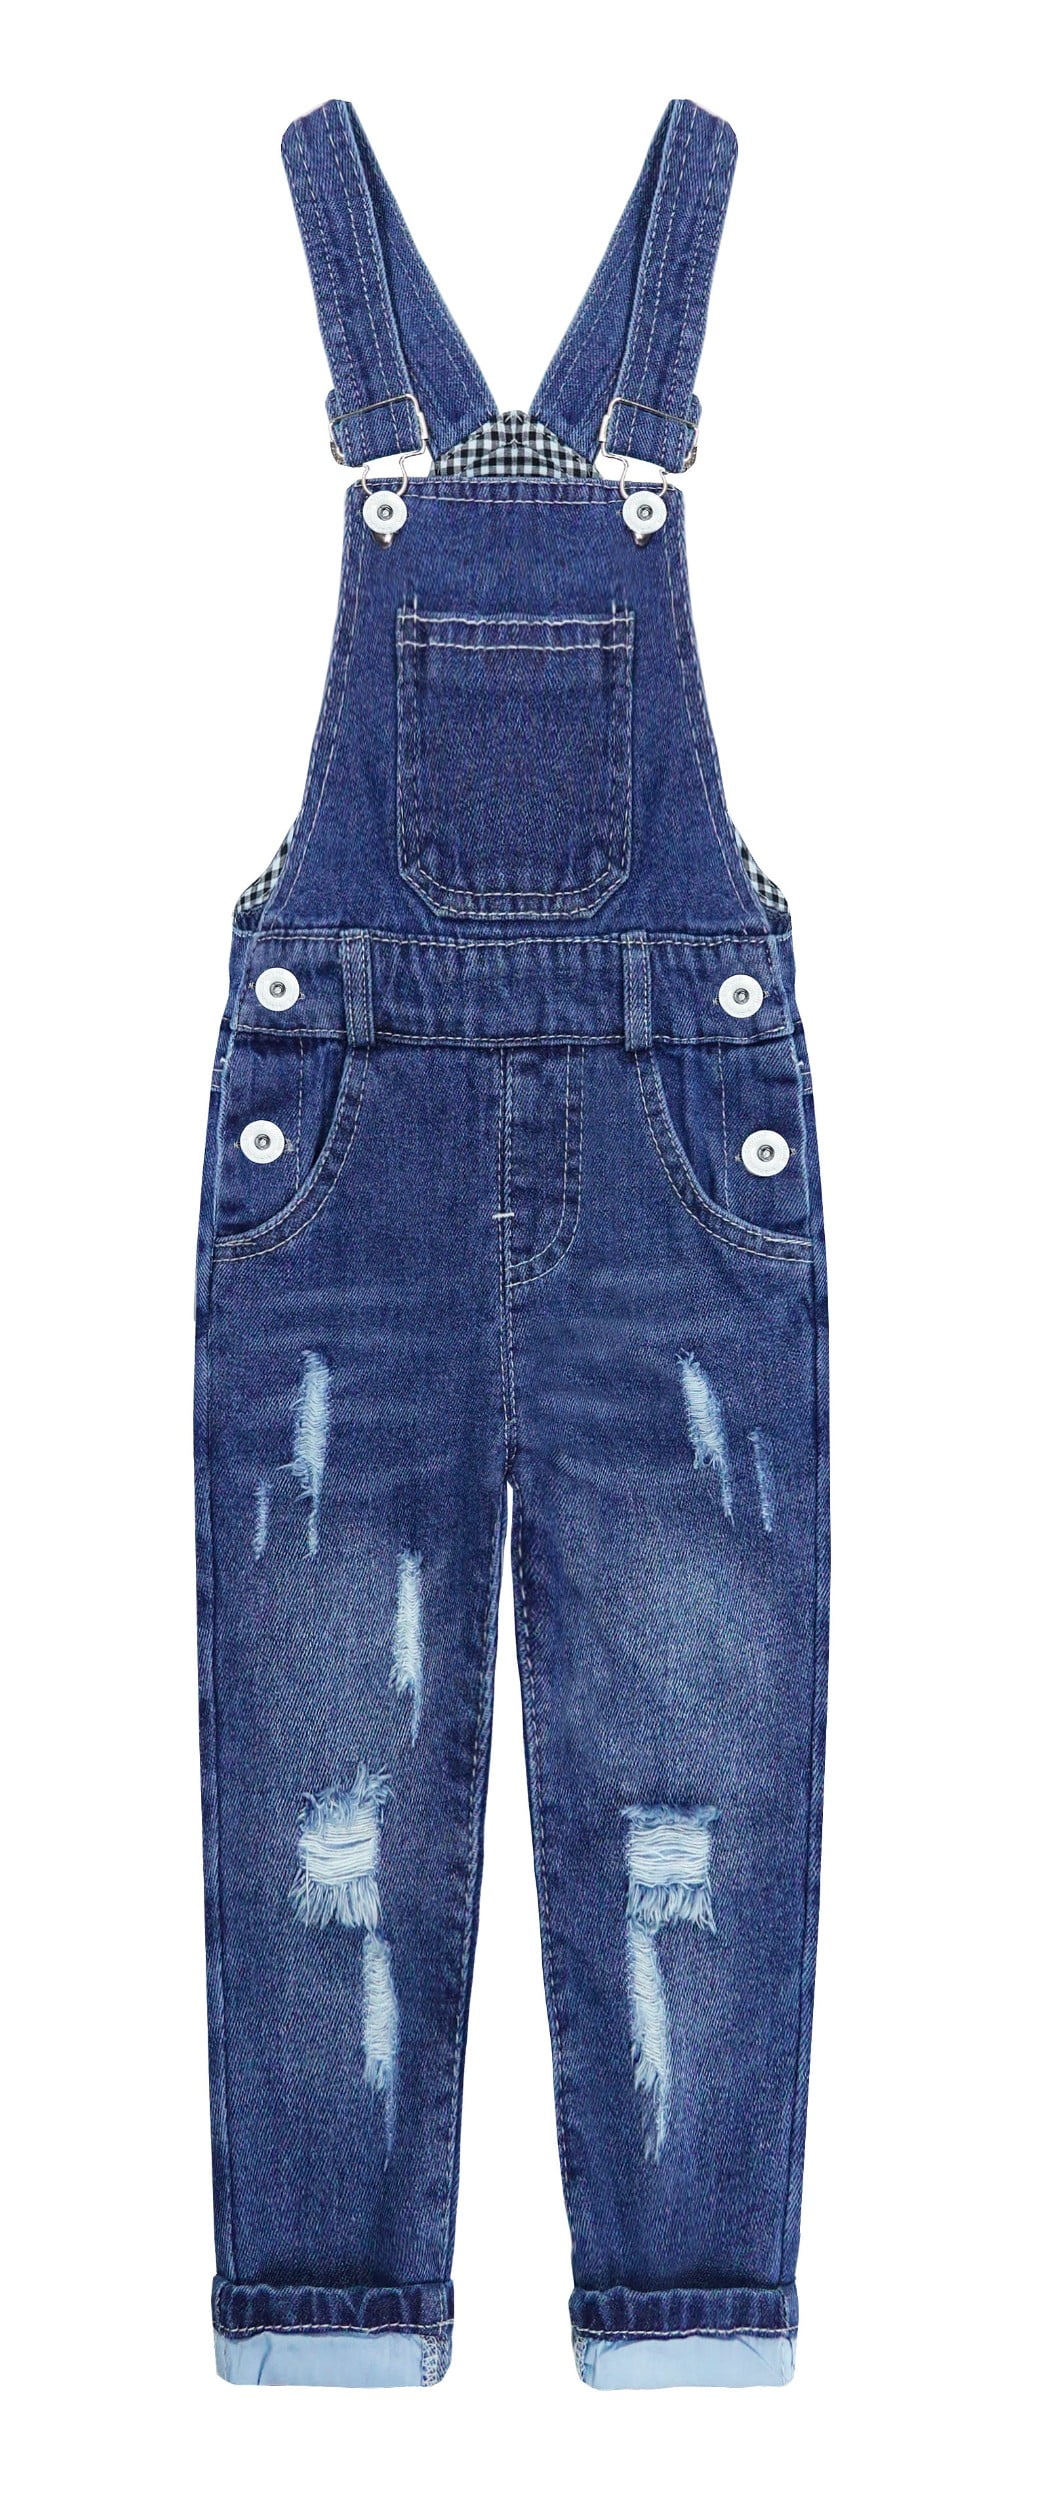 KIDSCOOL SPACE Boy Girl Cute Overalls,Fashion Washed Denim Jumpsuit ...